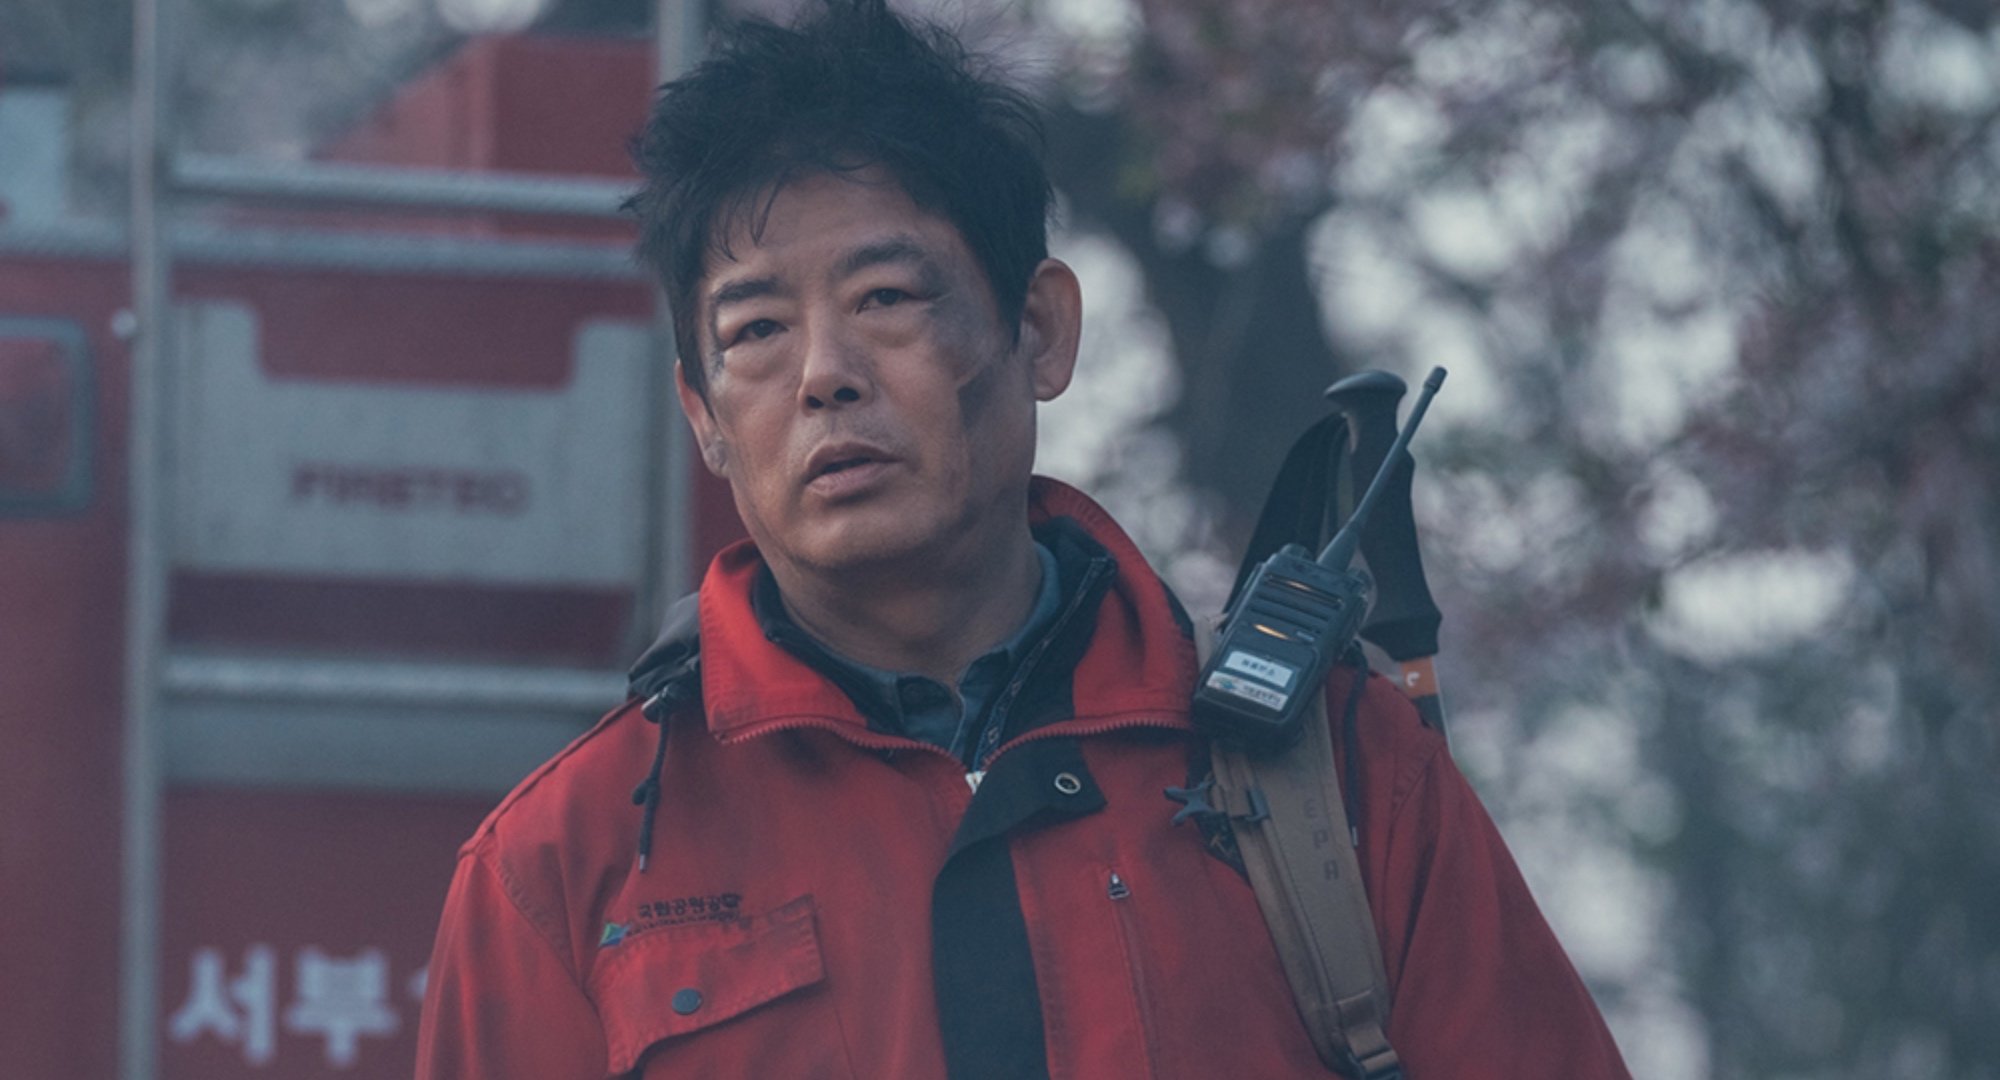 Character Jo Dae-jin for 'Jirisan' Episode 8 covered in soot and wearing red ranger jacket